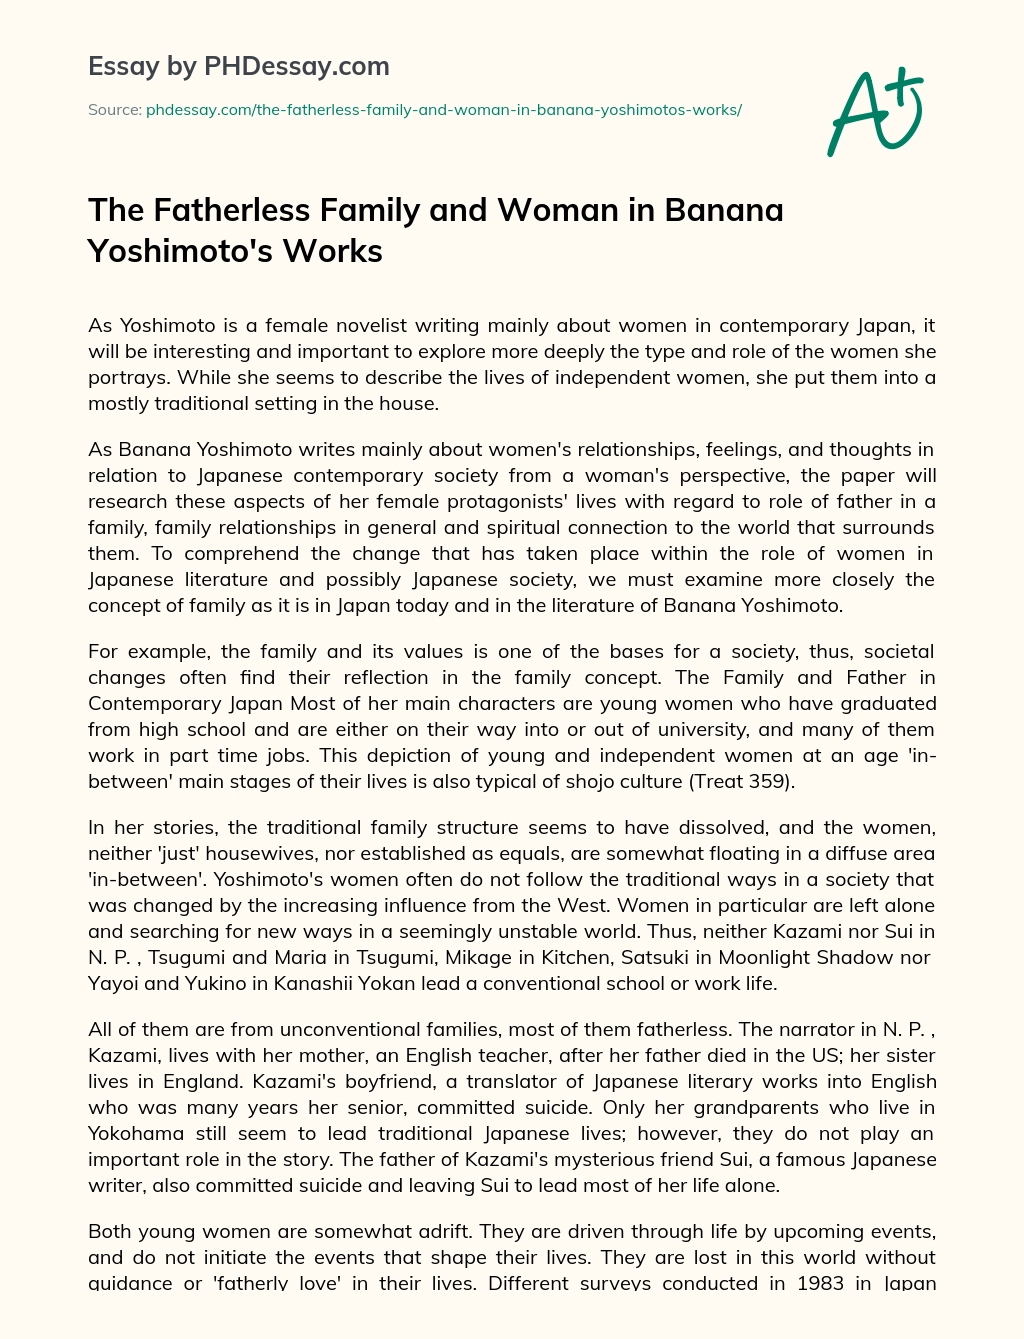 The Fatherless Family and Woman in Banana Yoshimoto’s Works essay